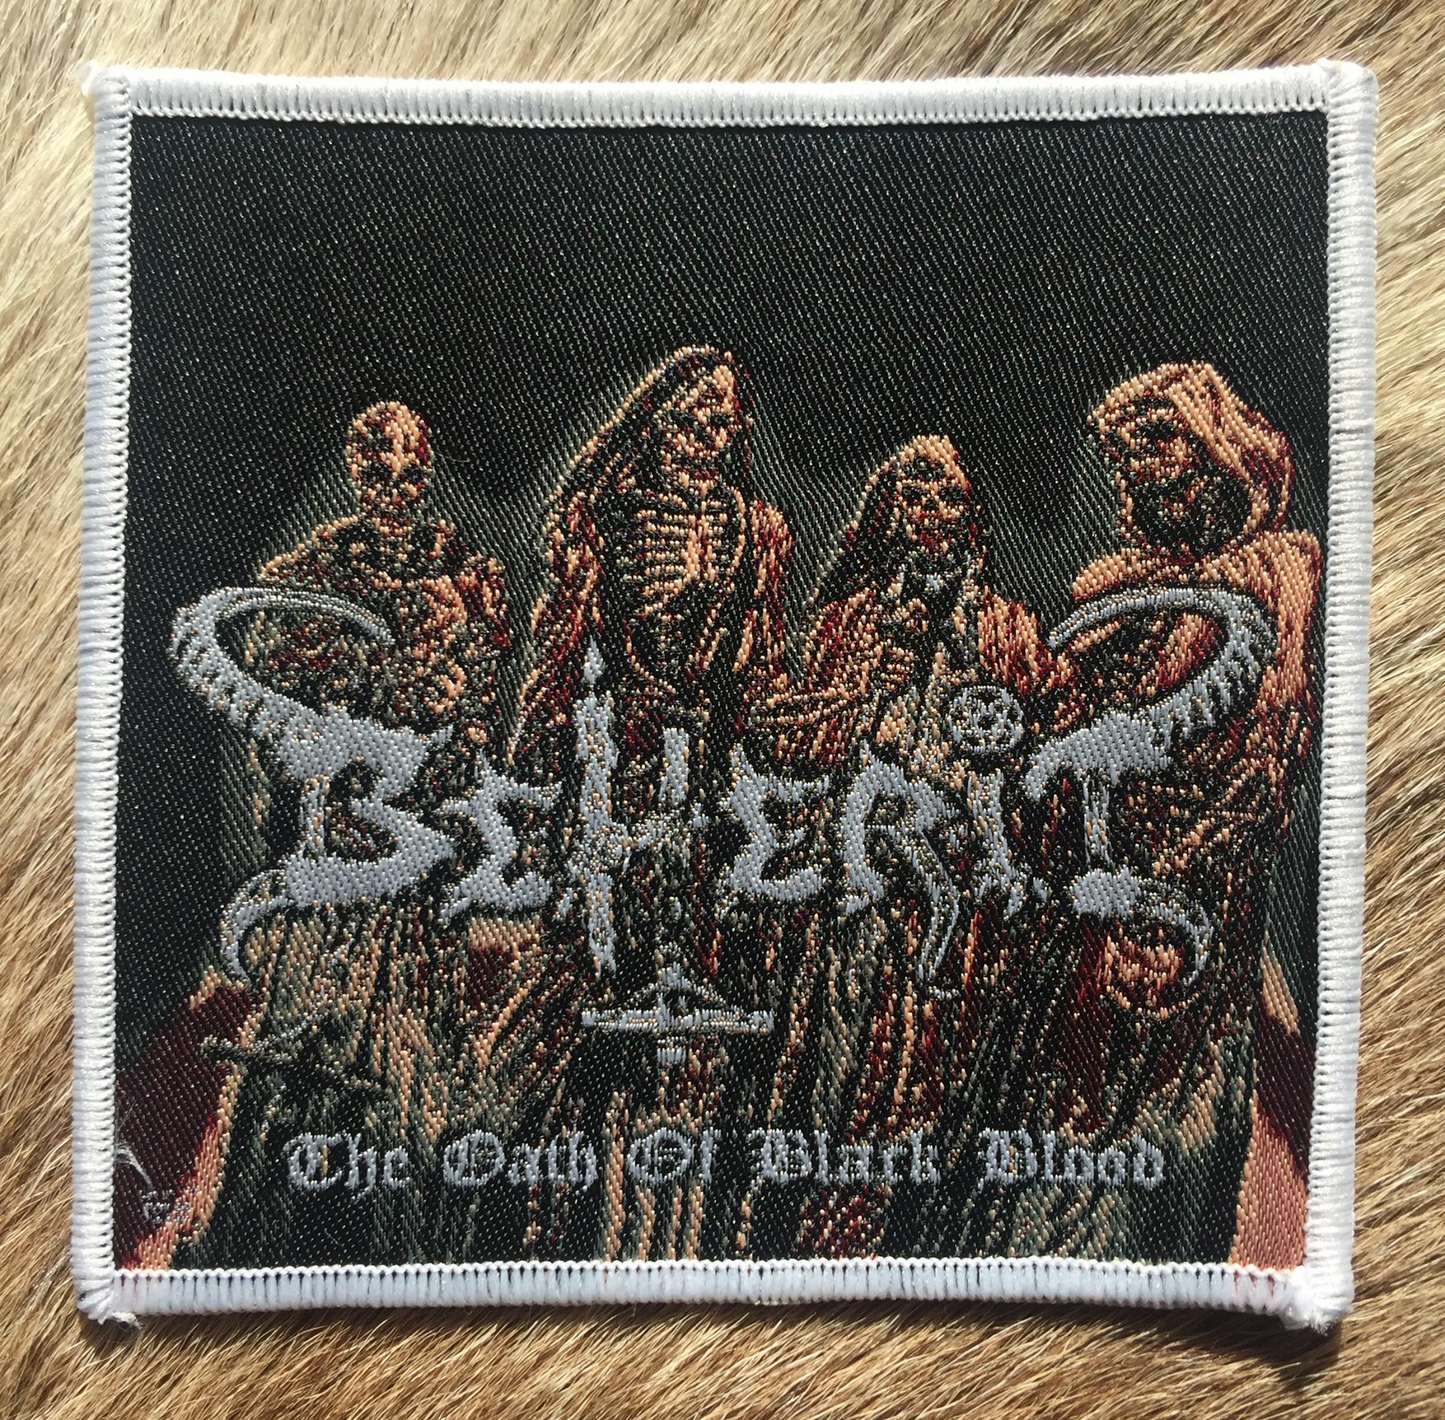 Beherit - The Oath of Black Blood White Border Patch